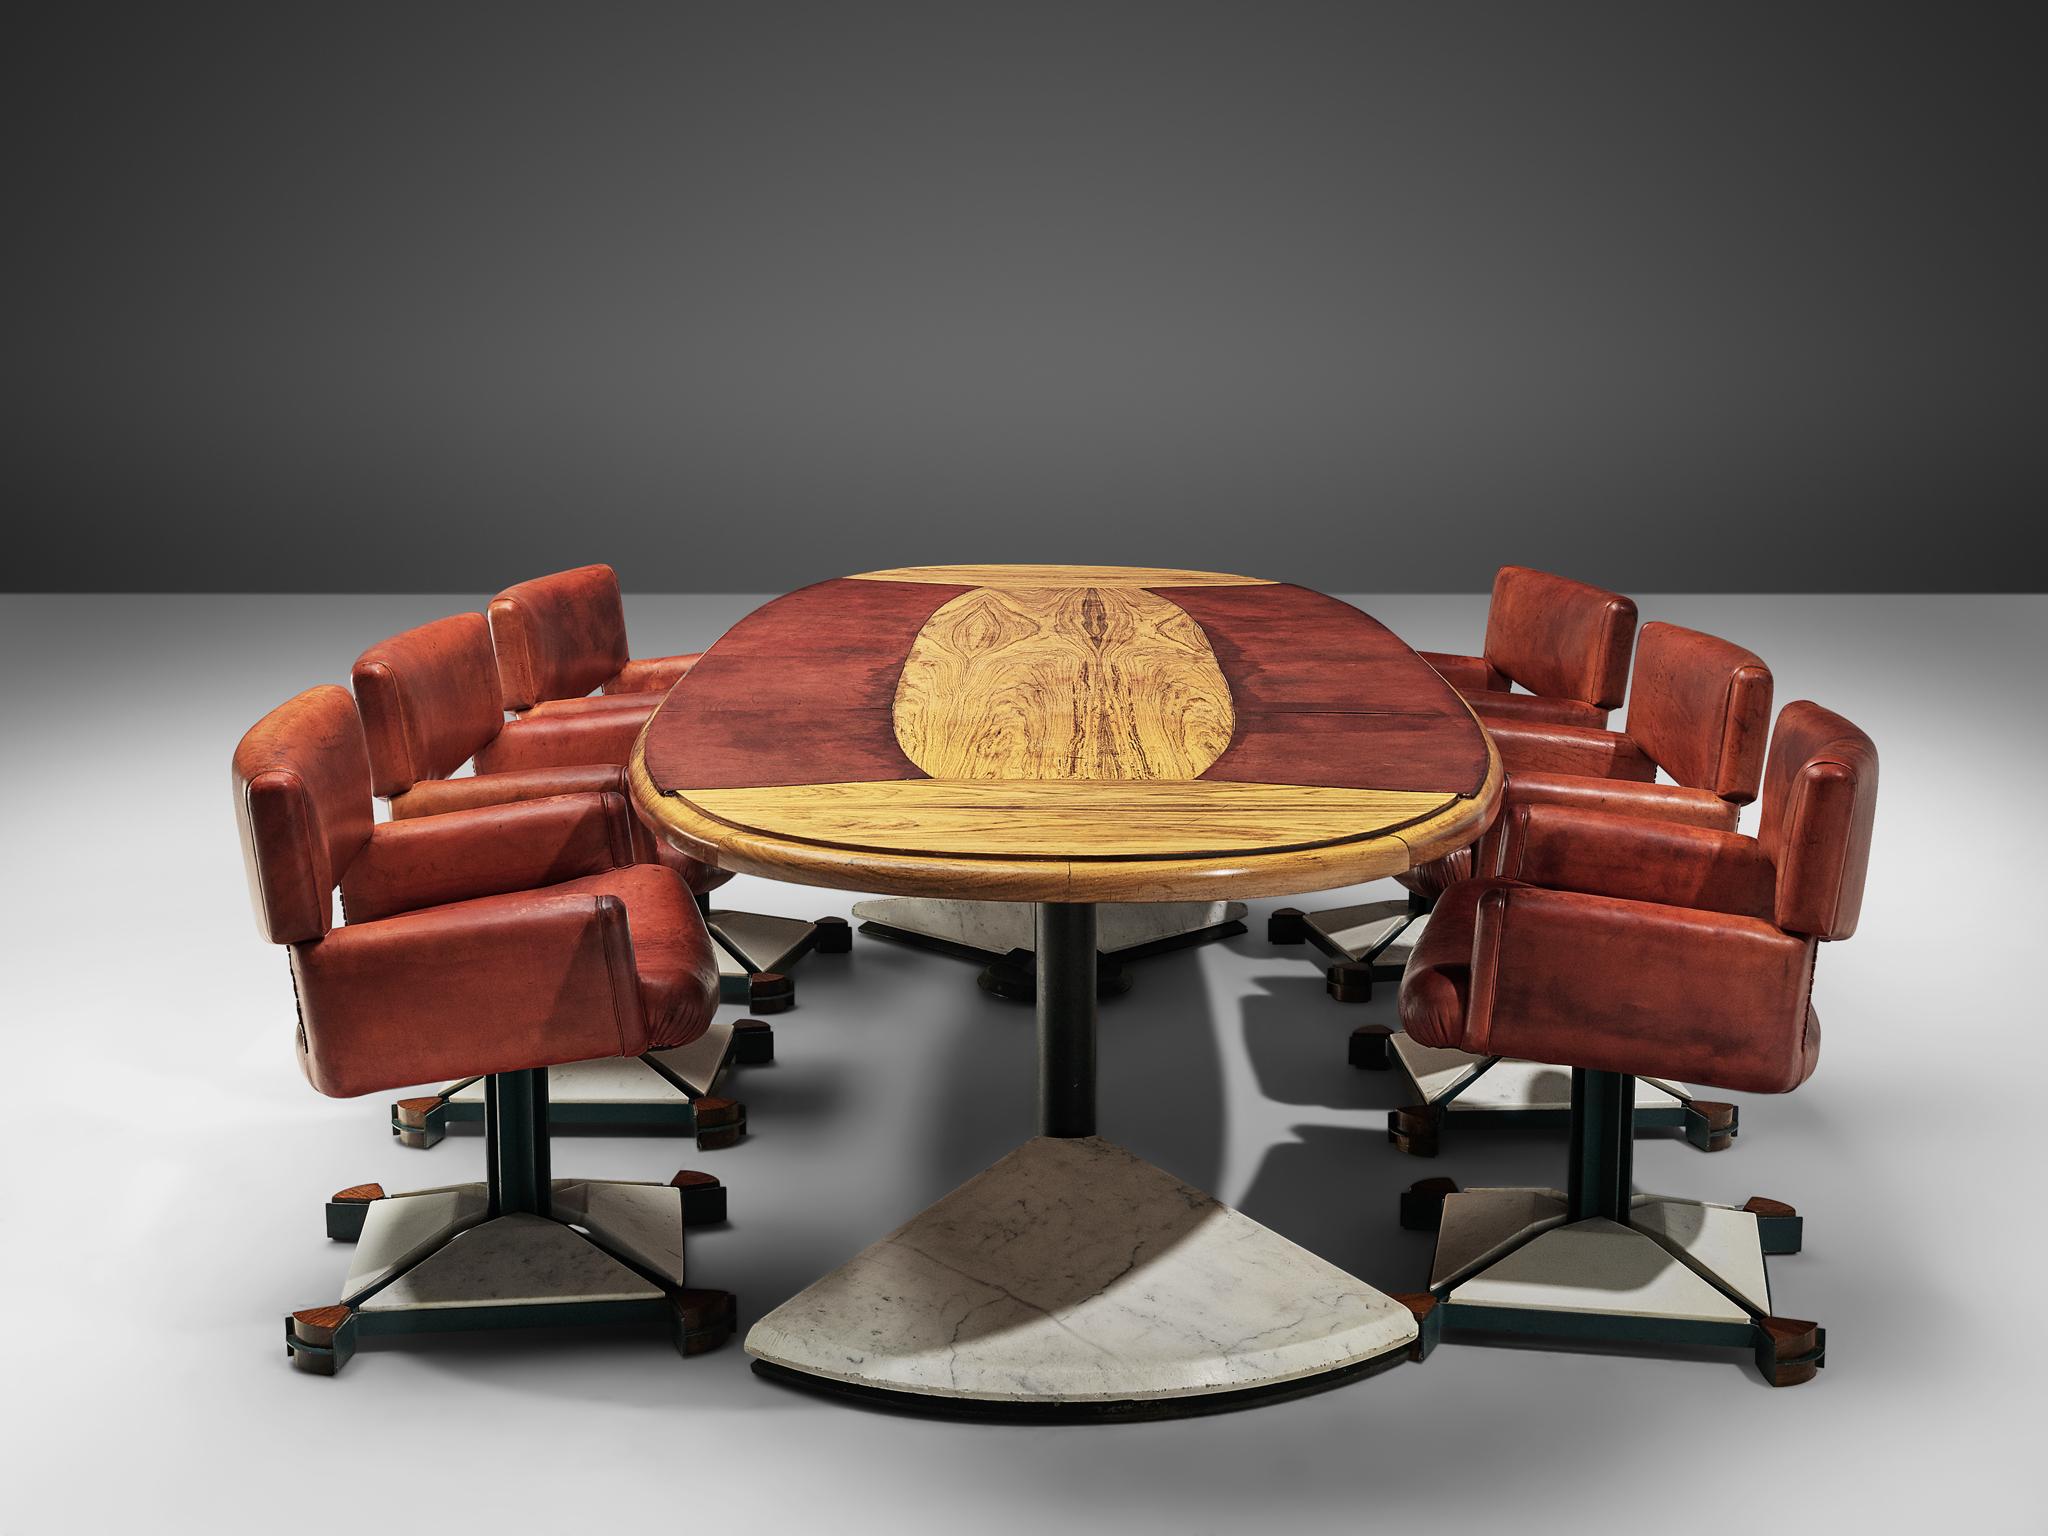 Steel Set of Conference Table and Chairs in Walnut and Red Leather